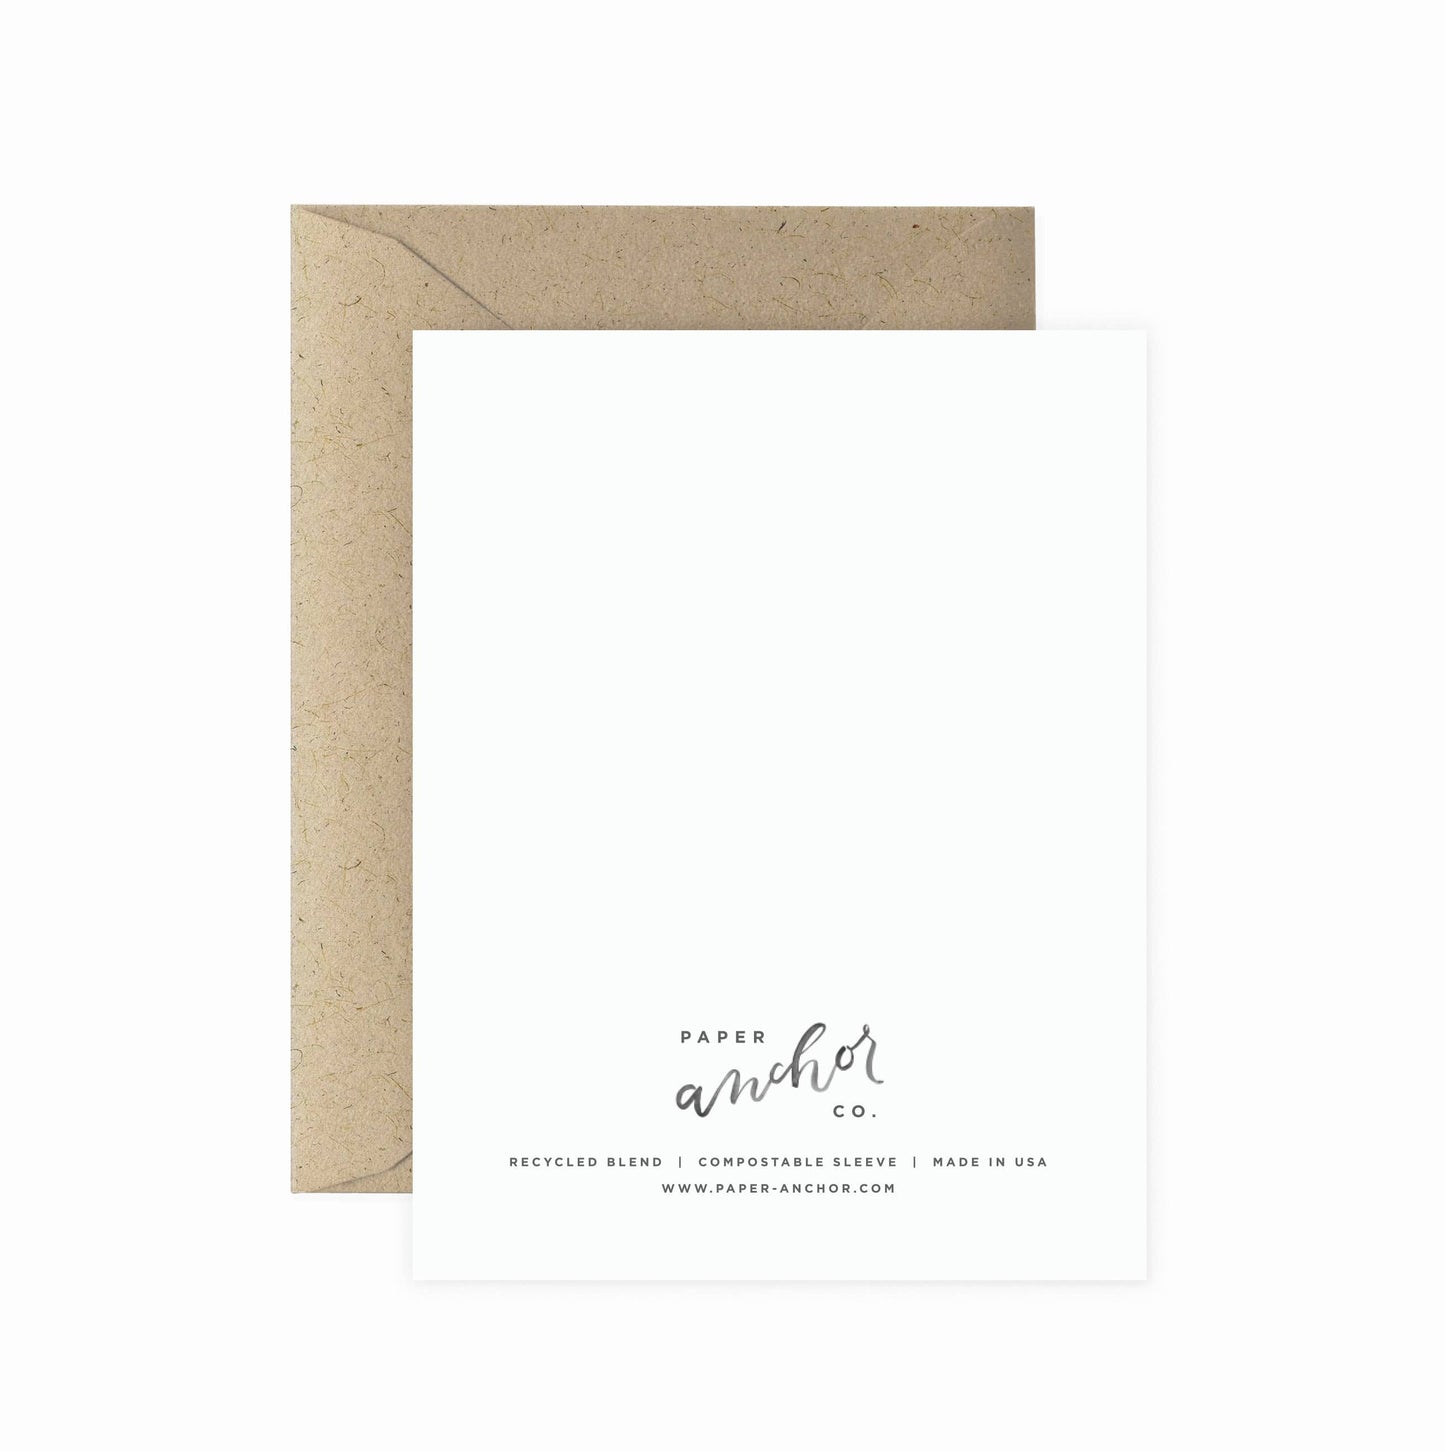 Lover Greeting Card by Paper Anchor Co.